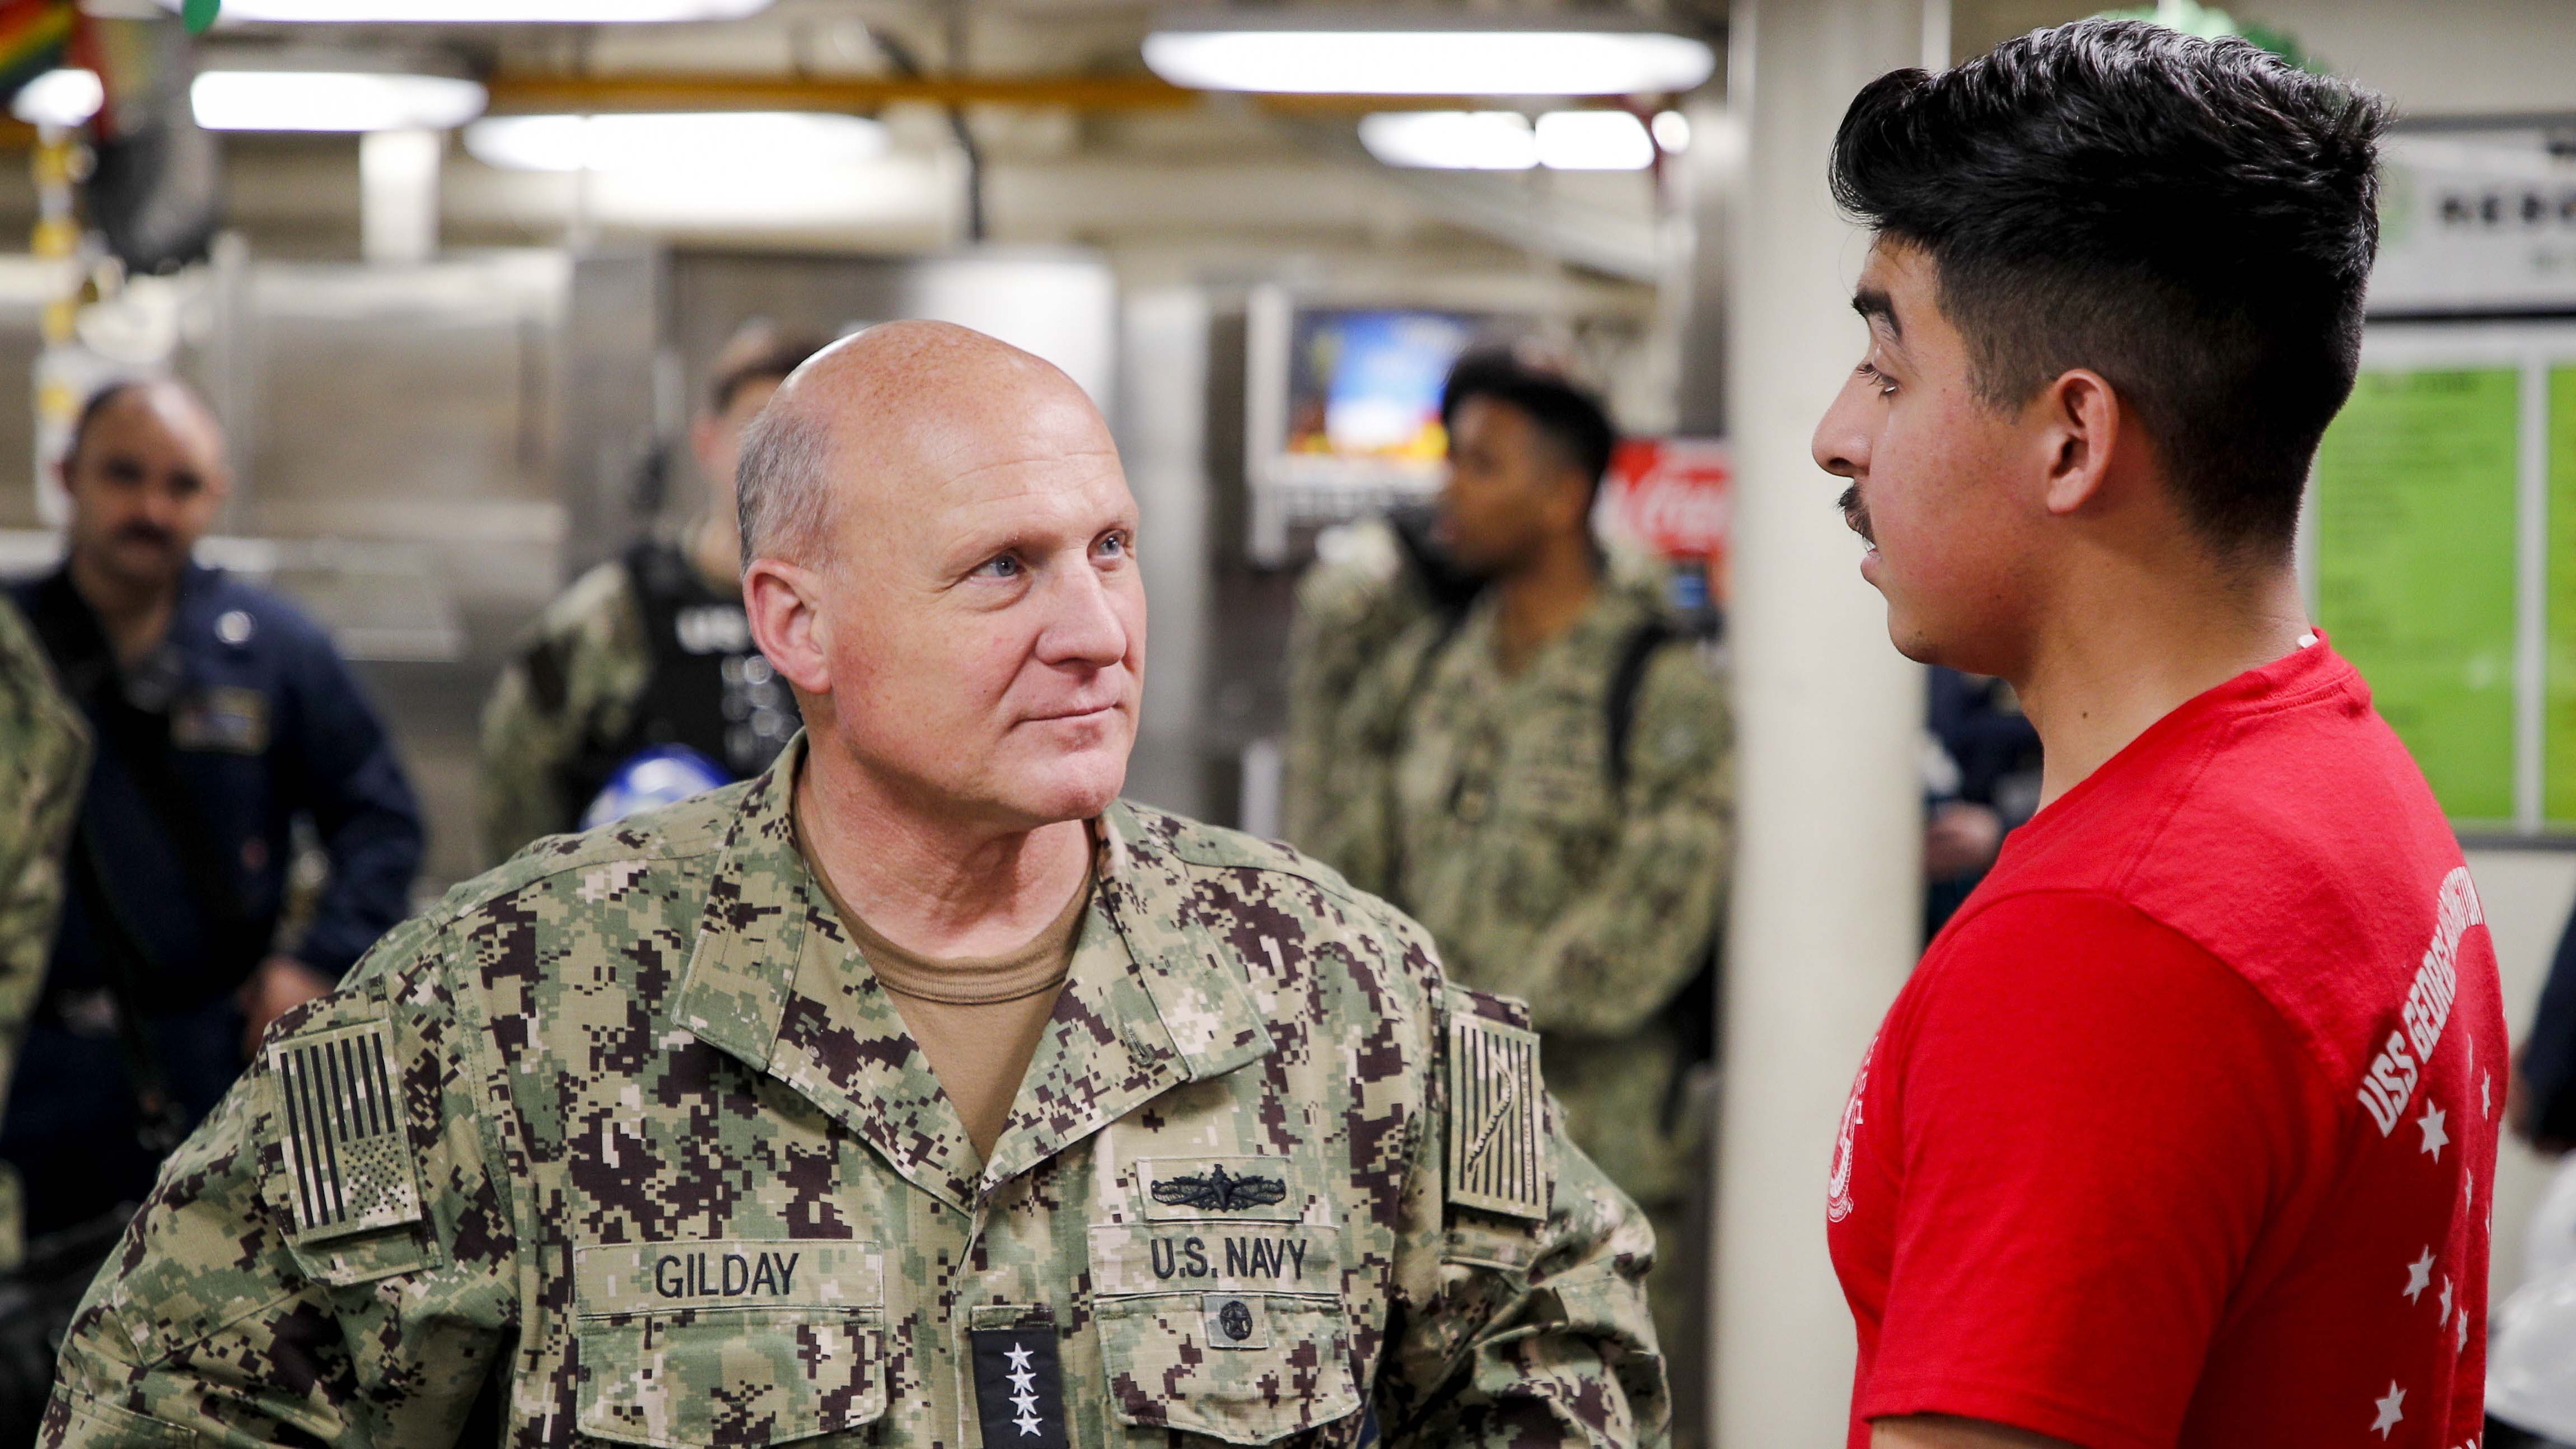 Chief of Naval Operations Adm. Mike Gilday speaks with Airman Juan D. Venegas during a visit aboard the USS George Washington in Newport News. The George Washington is undergoing refueling and complex overhaul at Newport News Shipbuilding. (Image: Department of Defense)